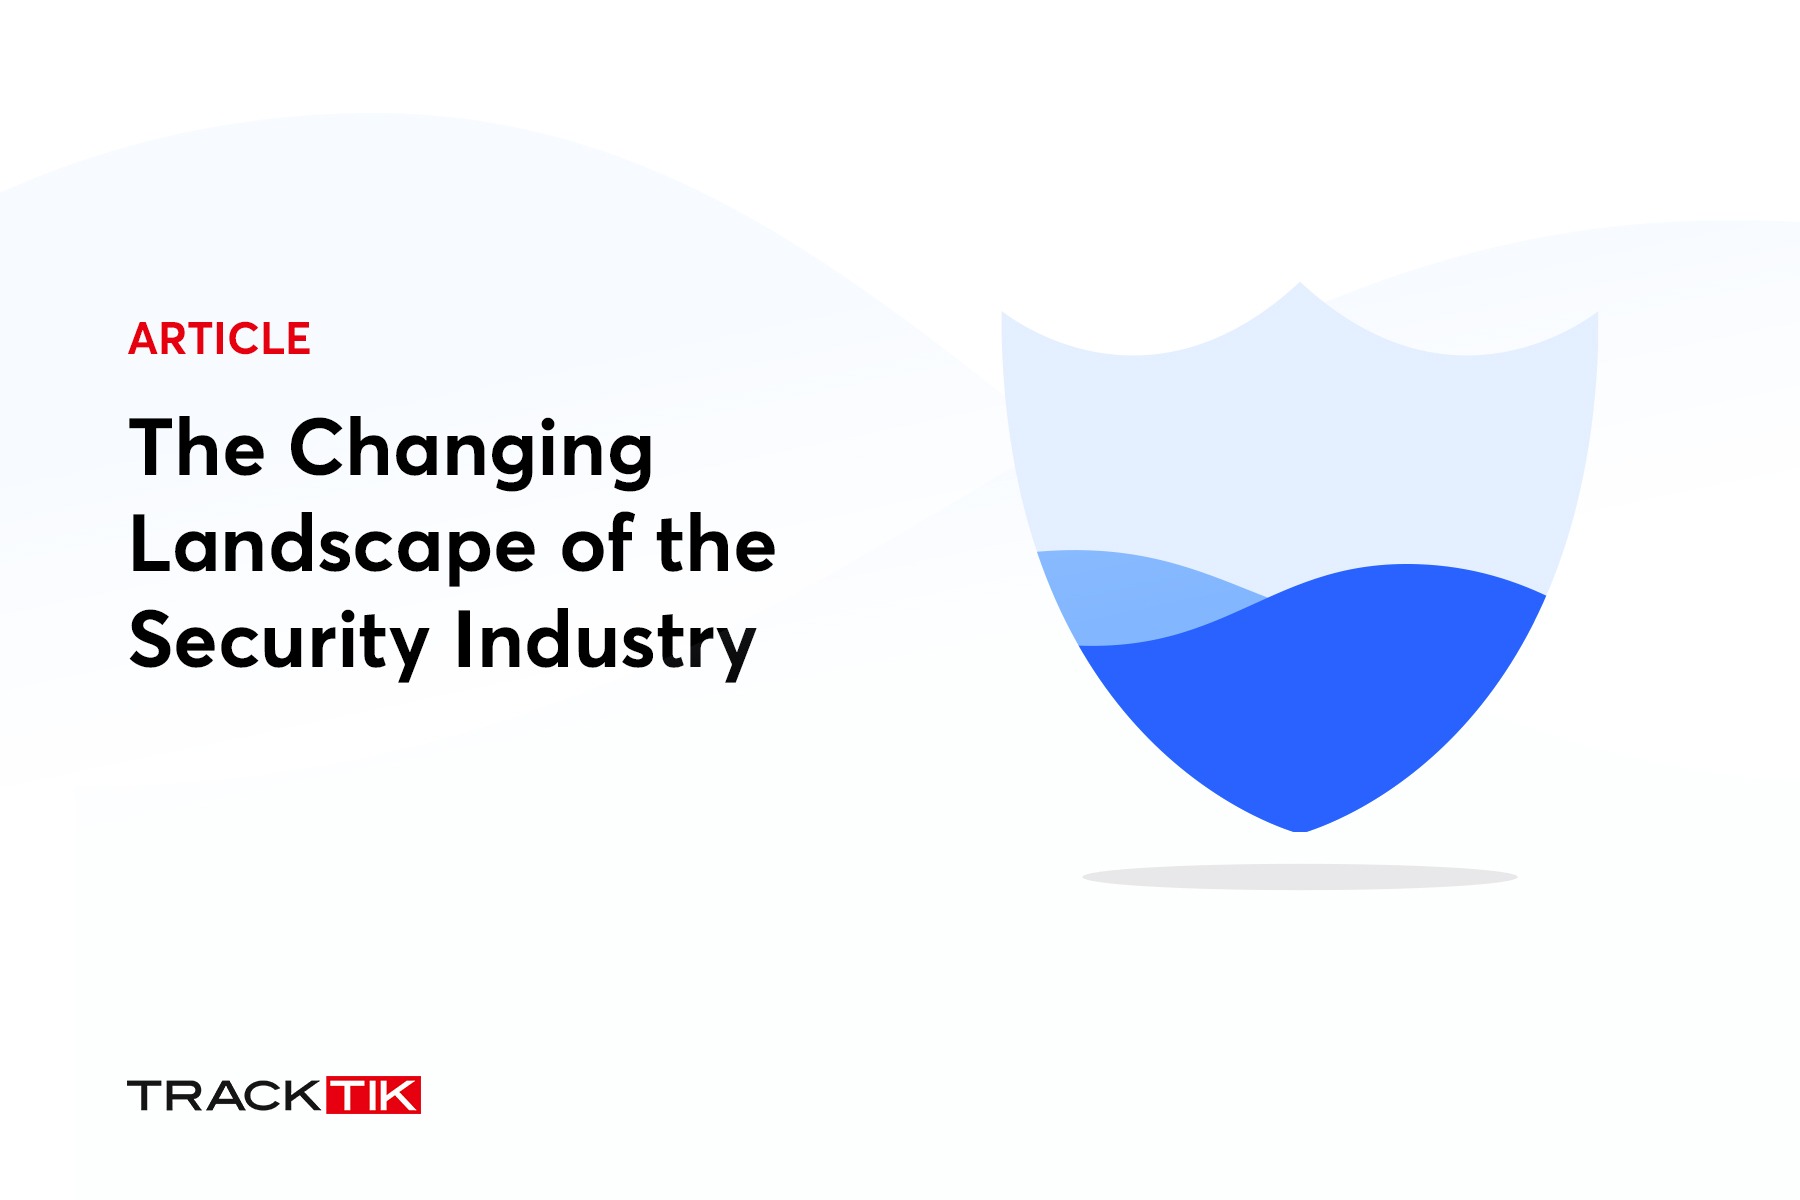 The Changing Landscape of the Security Industry